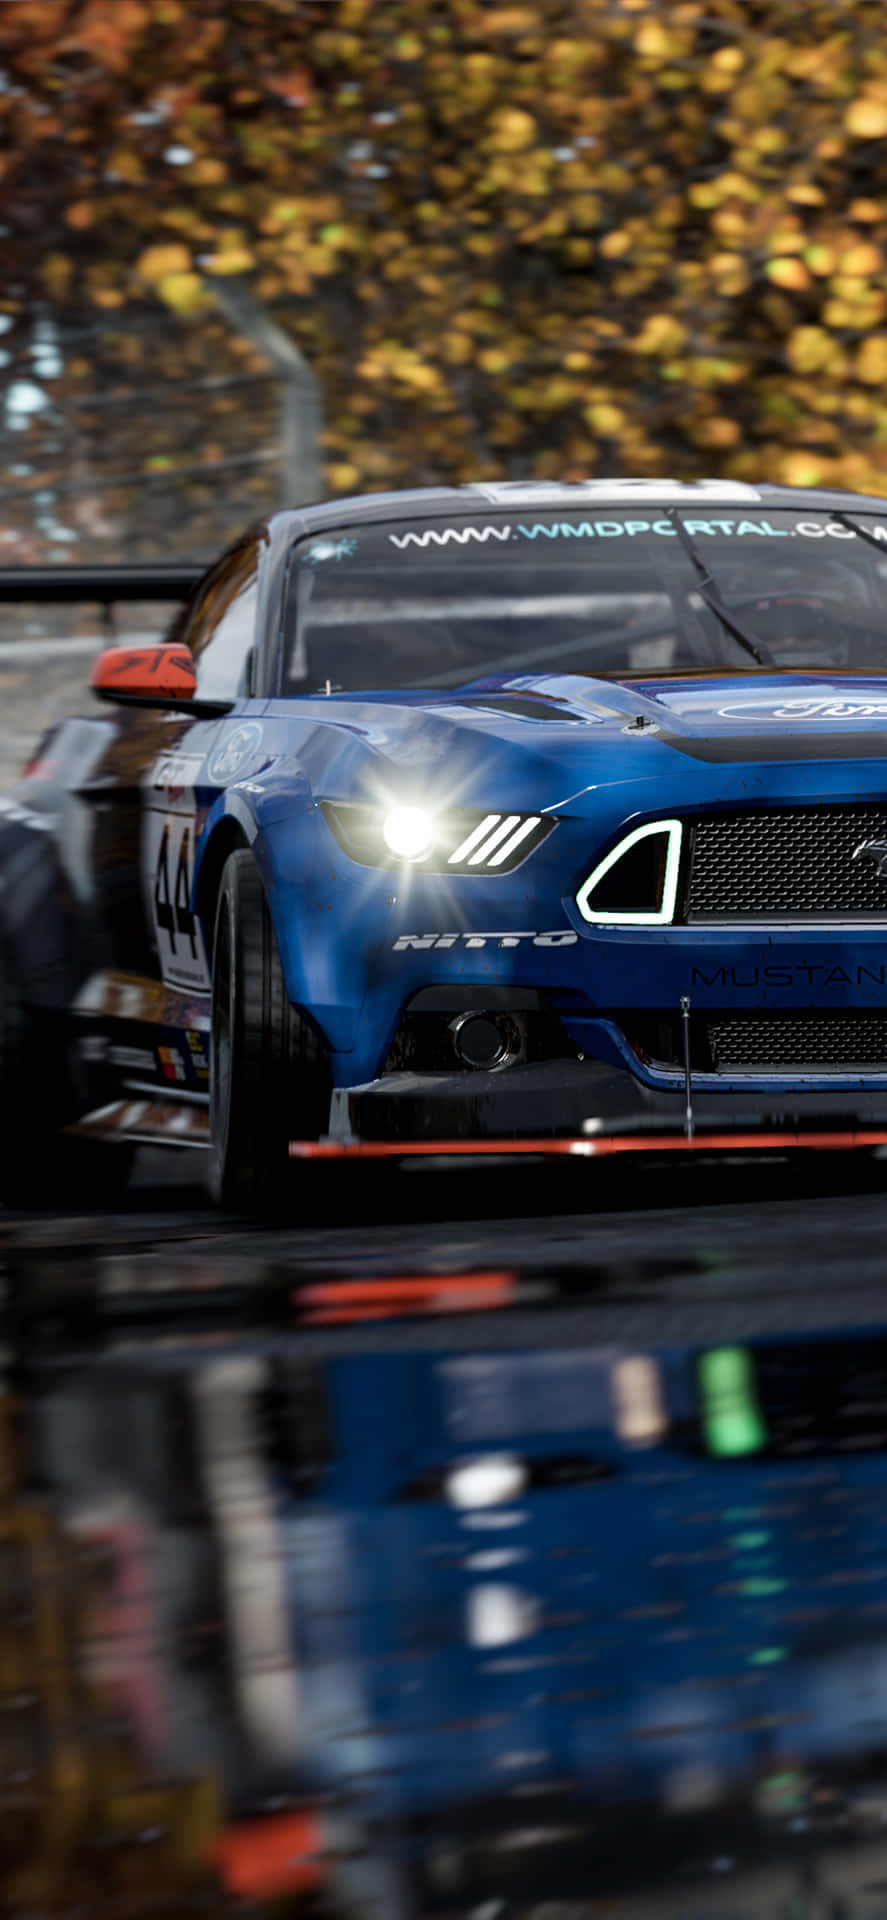 Iphone Xs Max Project Cars 2 Blue 2018 Ford Mustangbackground